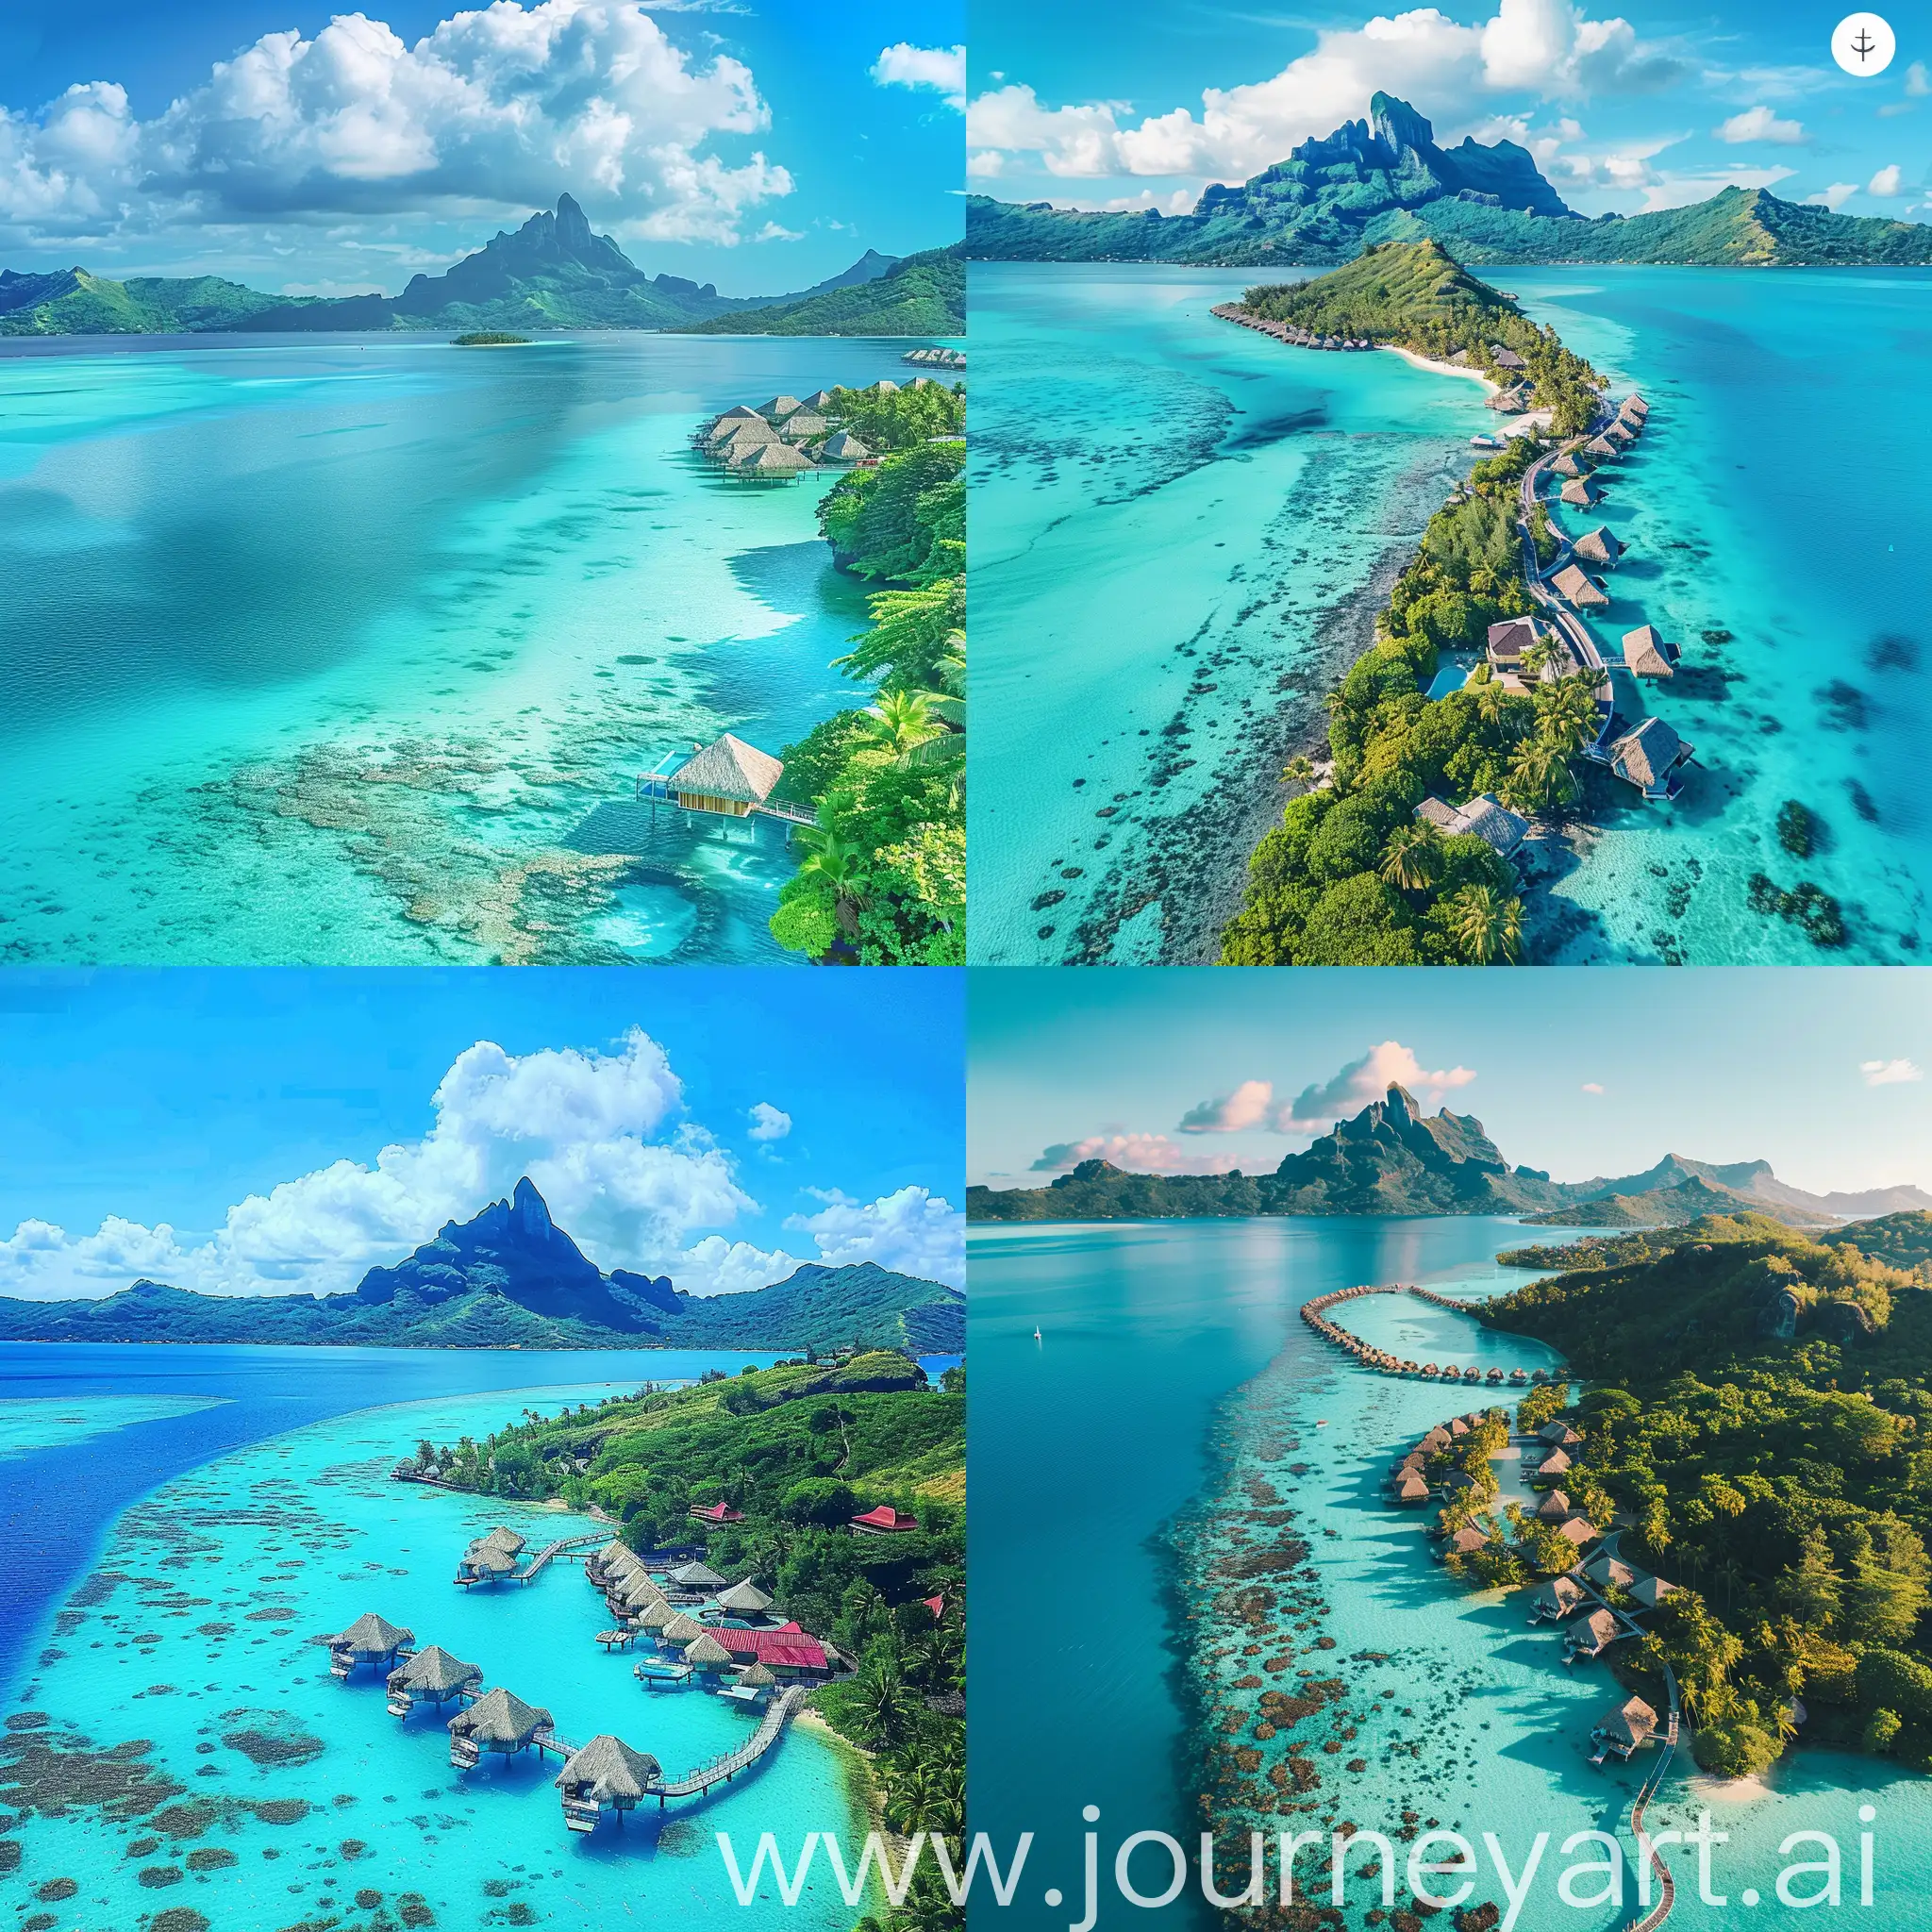 Tranquil-Serenity-of-Bora-Bora-Overwater-Bungalows-and-Mount-Otemanu